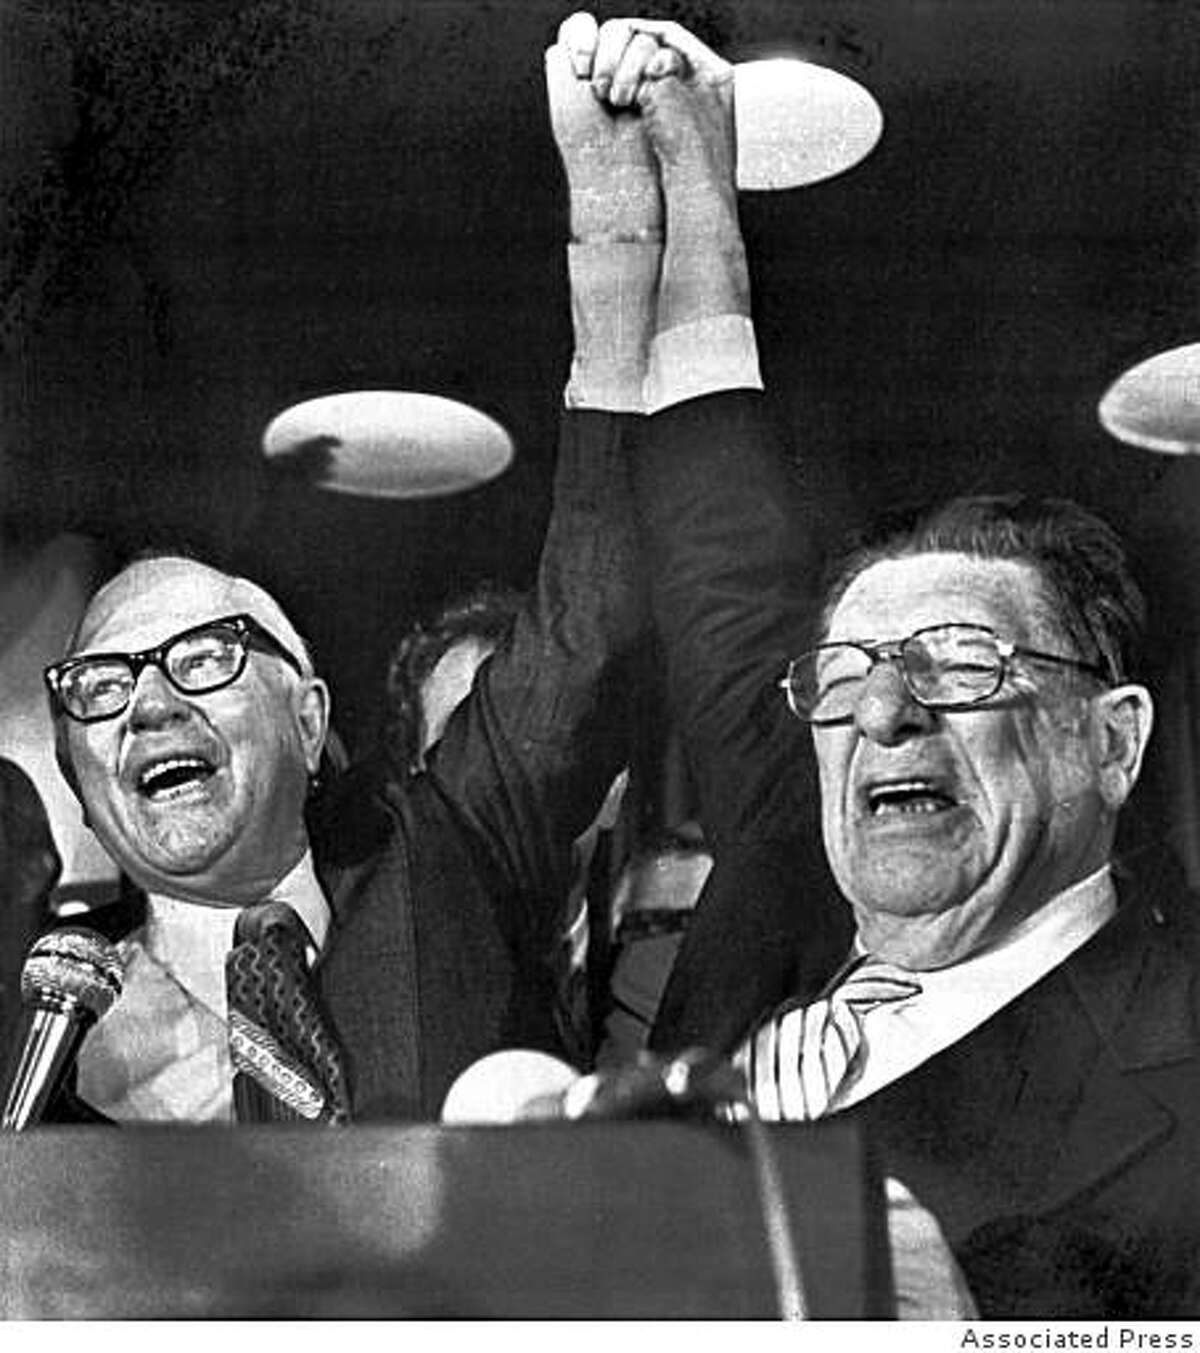 Paul Gann, left, and Howard Jarvis, hold up their hands on the night of June 7, 1978, as their co-authored initiative Proposition 13, took a commanding lead in the California primary.The Proposition provides monumental tax relief to peroperty owners. (AP Photo/stf)